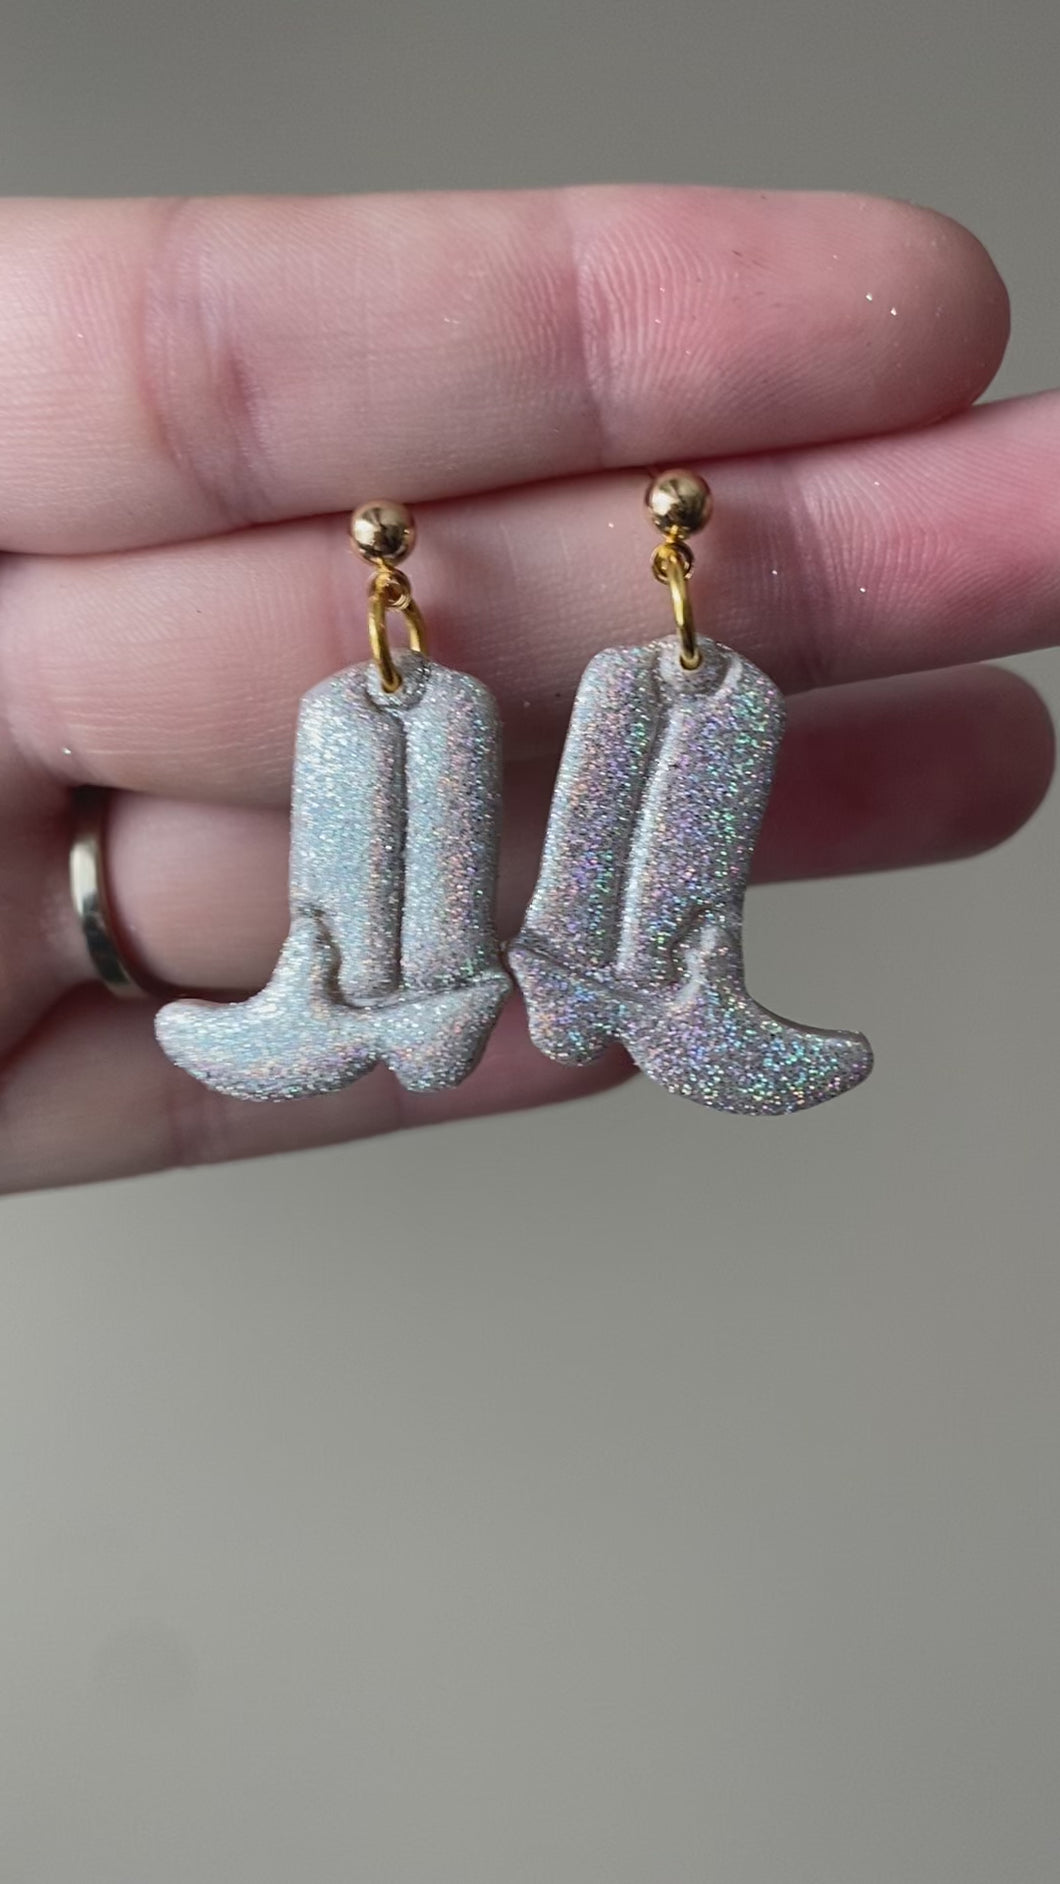 TS inspired, Sparkly Boots | Handmade Polymer Clay Earrings